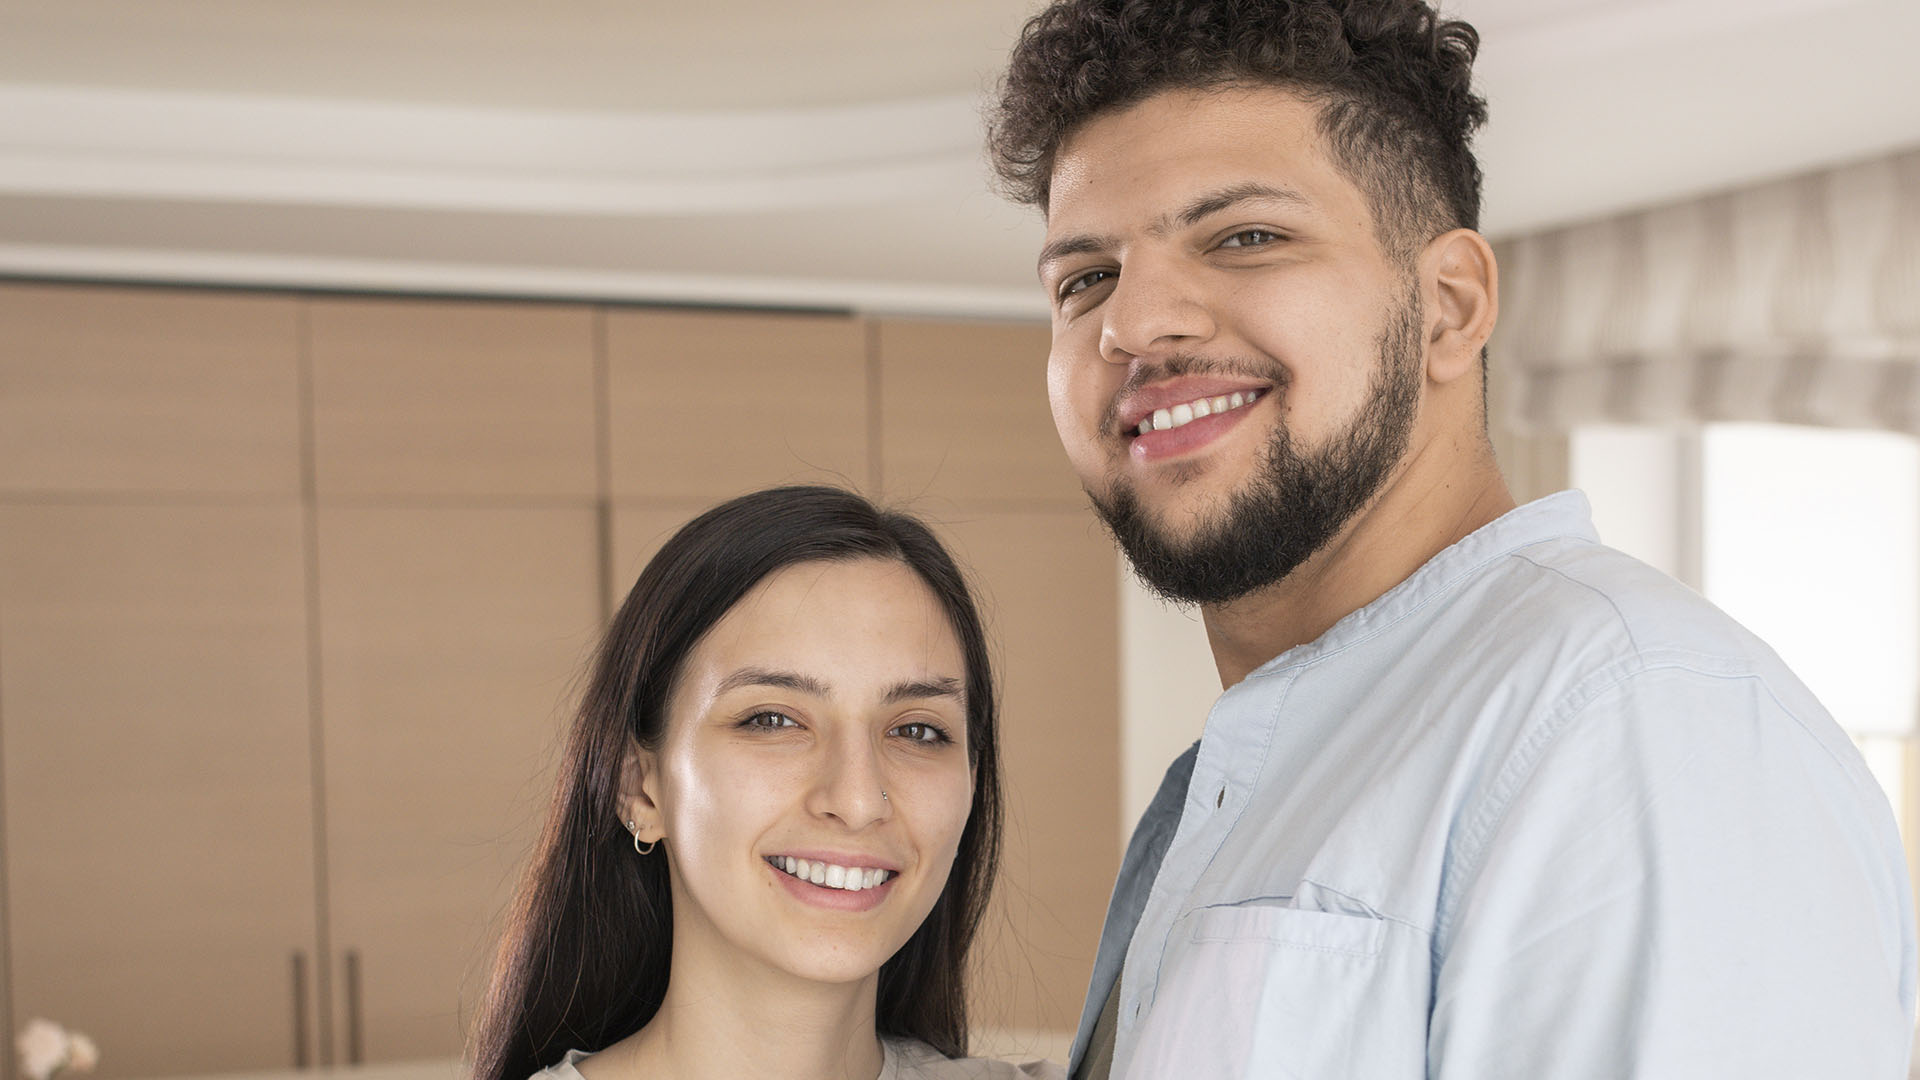 A man and woman stand indoors, smiling at the camera. The background features light wood cabinets and a window with a curtain. Is renting ruining your future? Find out more as we explore their journey toward homeownership.